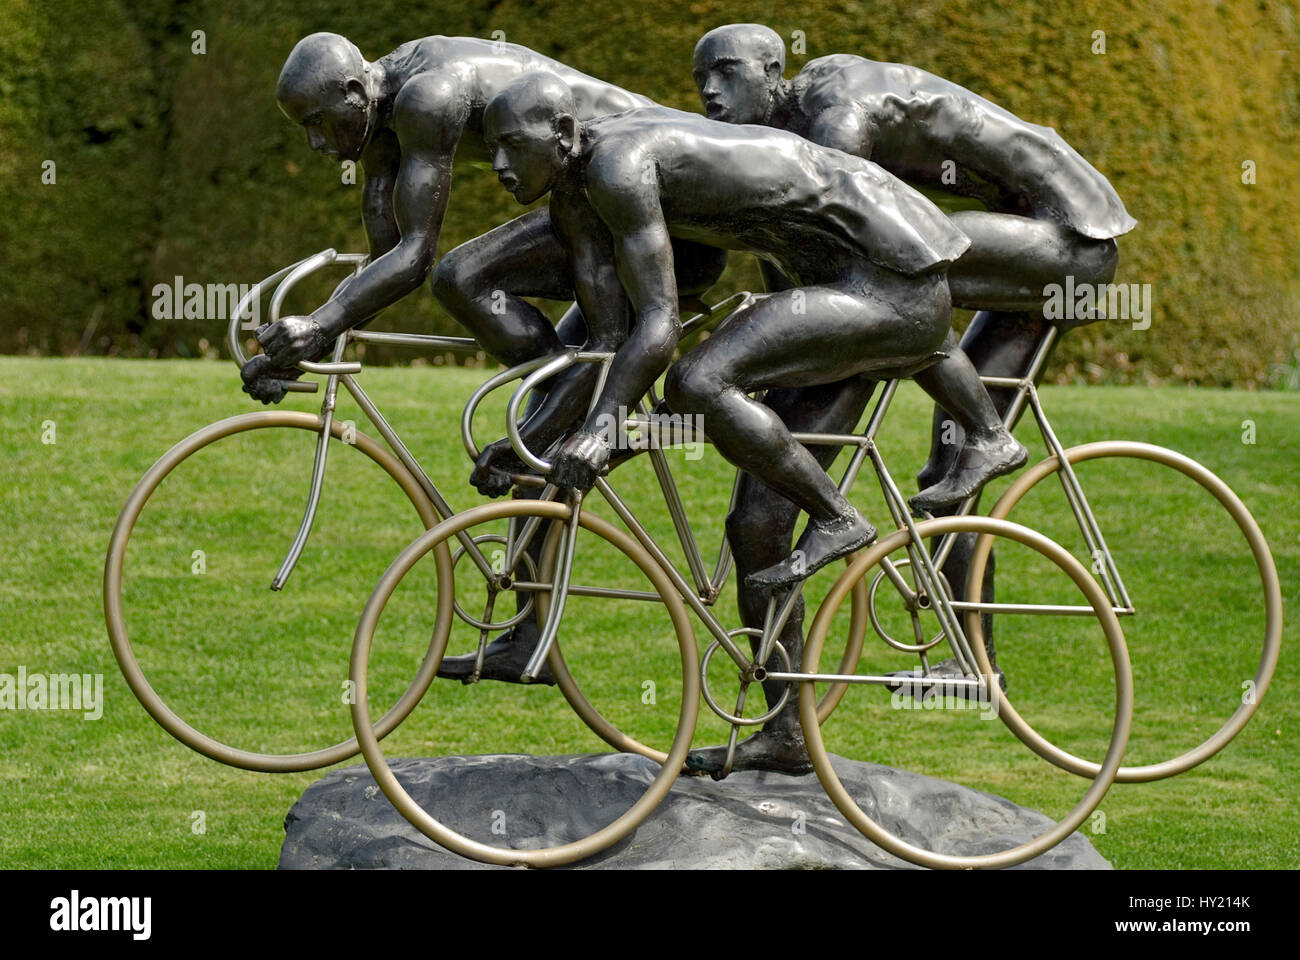 Image of the Cyclists Sculpture at the La Parc Olympic in Lausanne, Switzerland. Stock Photo